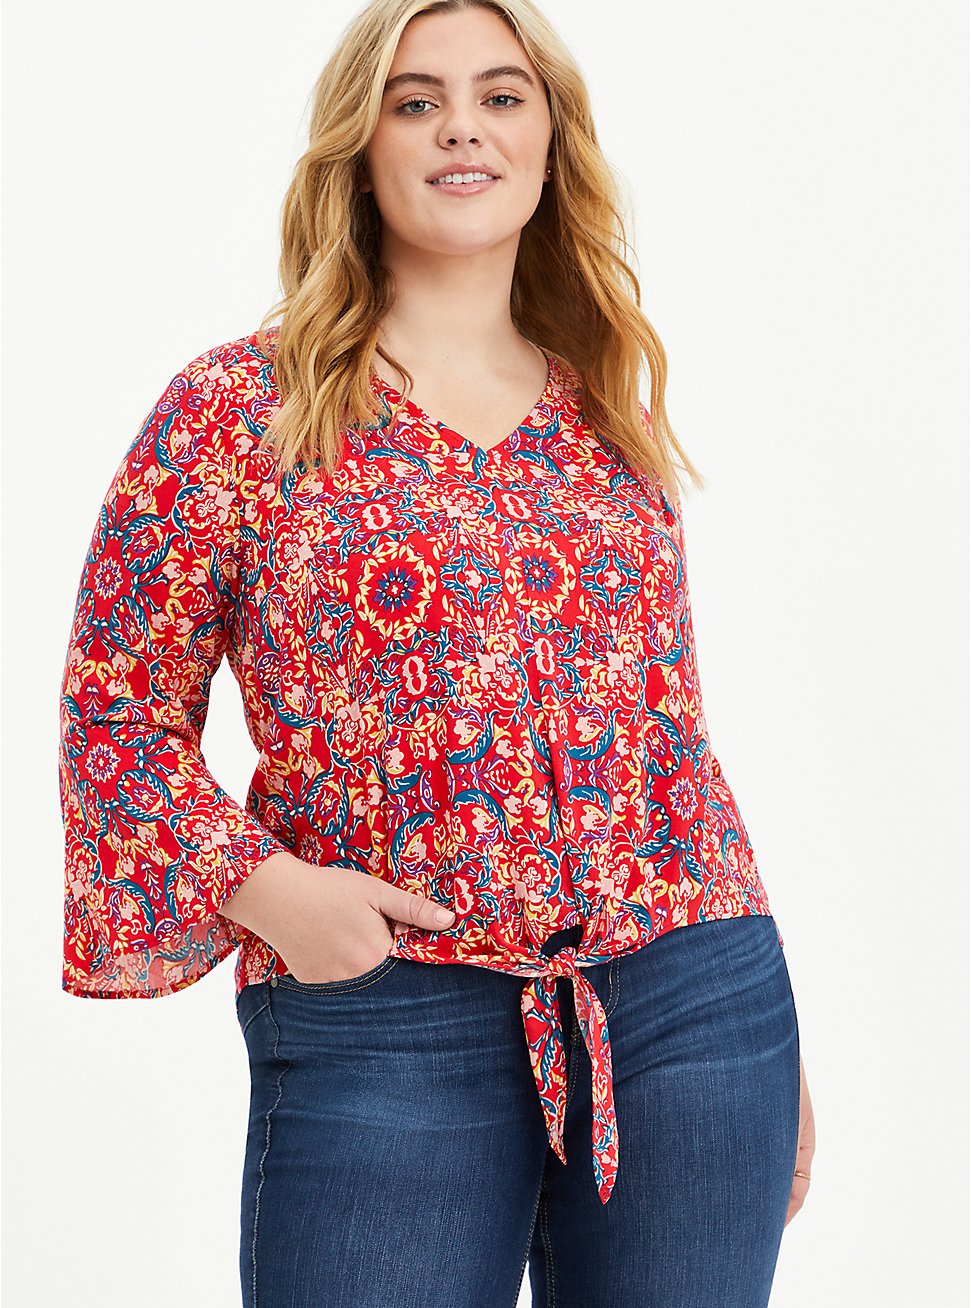 Red Medallion Textured Stretch Rayon Blouse, OTHER PRINTS, hi-res